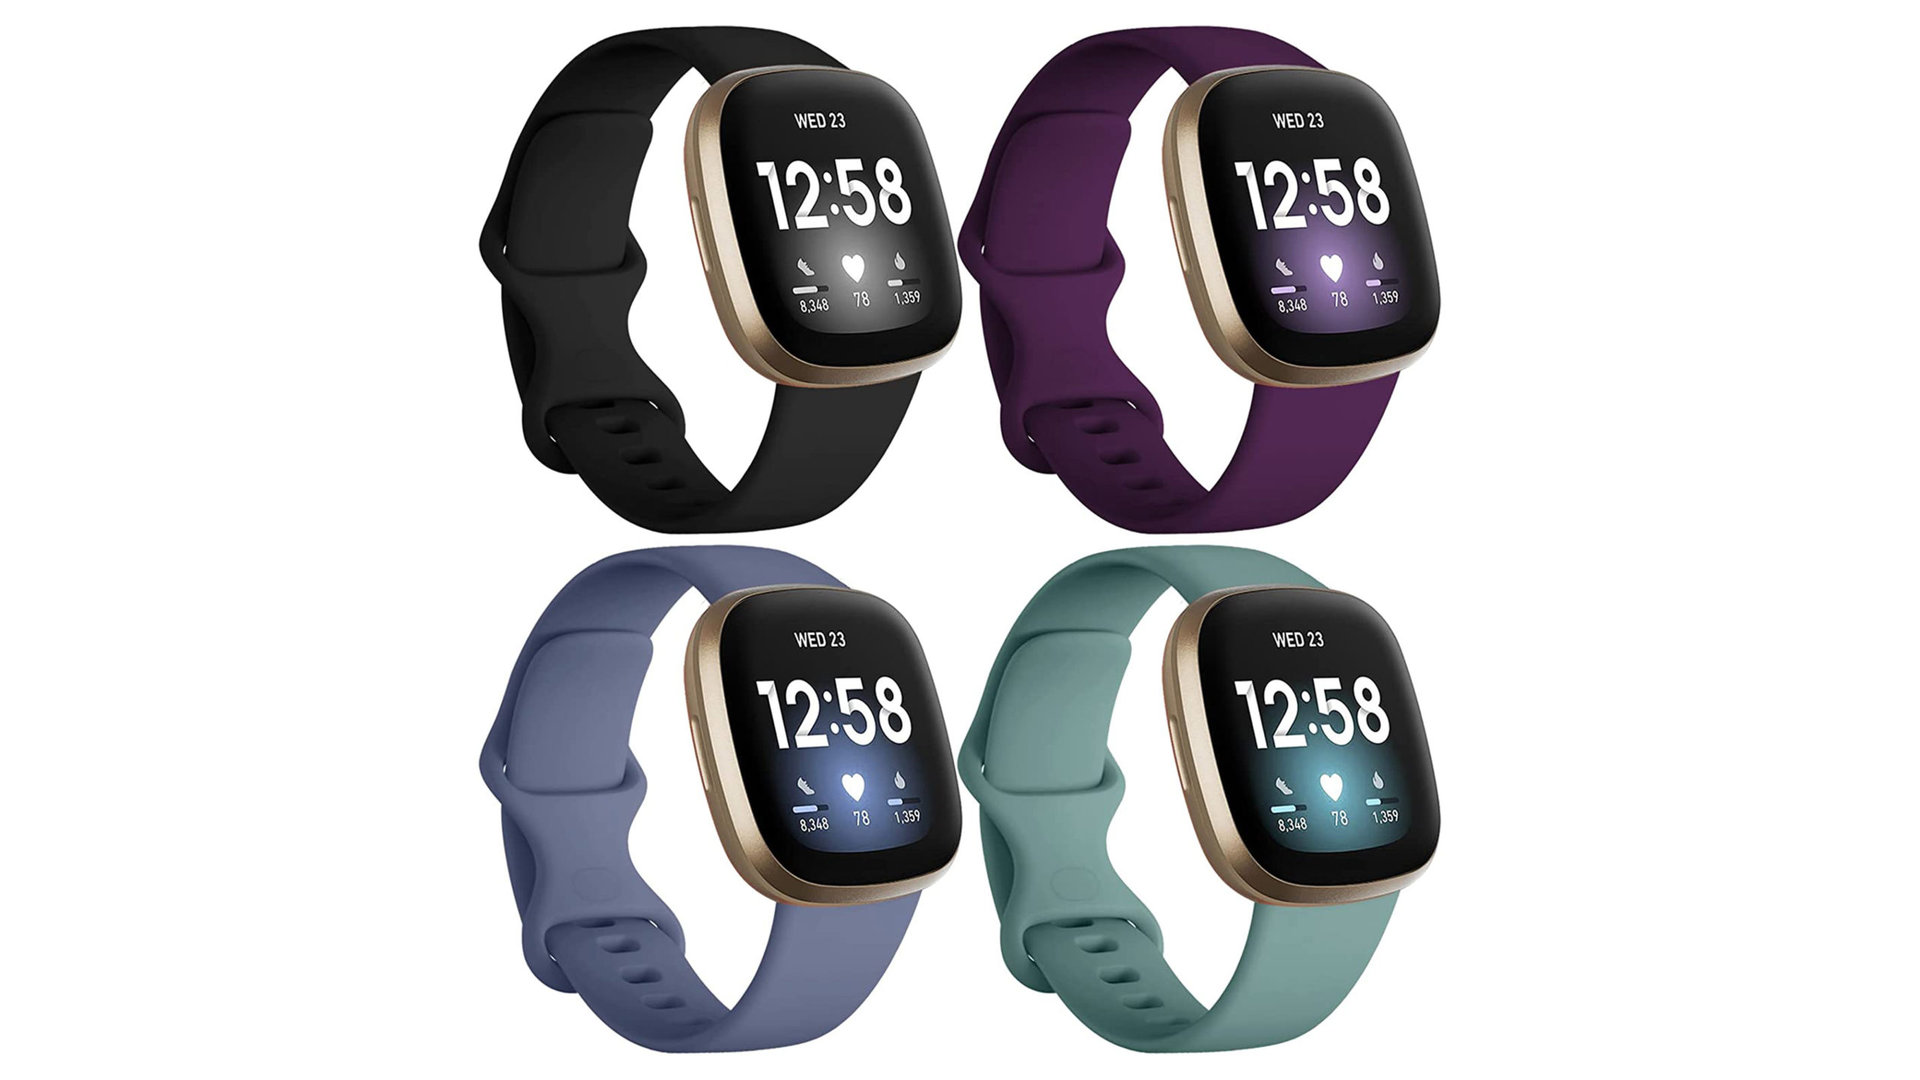 Dirrelo silicon Sport bands in four different colors.